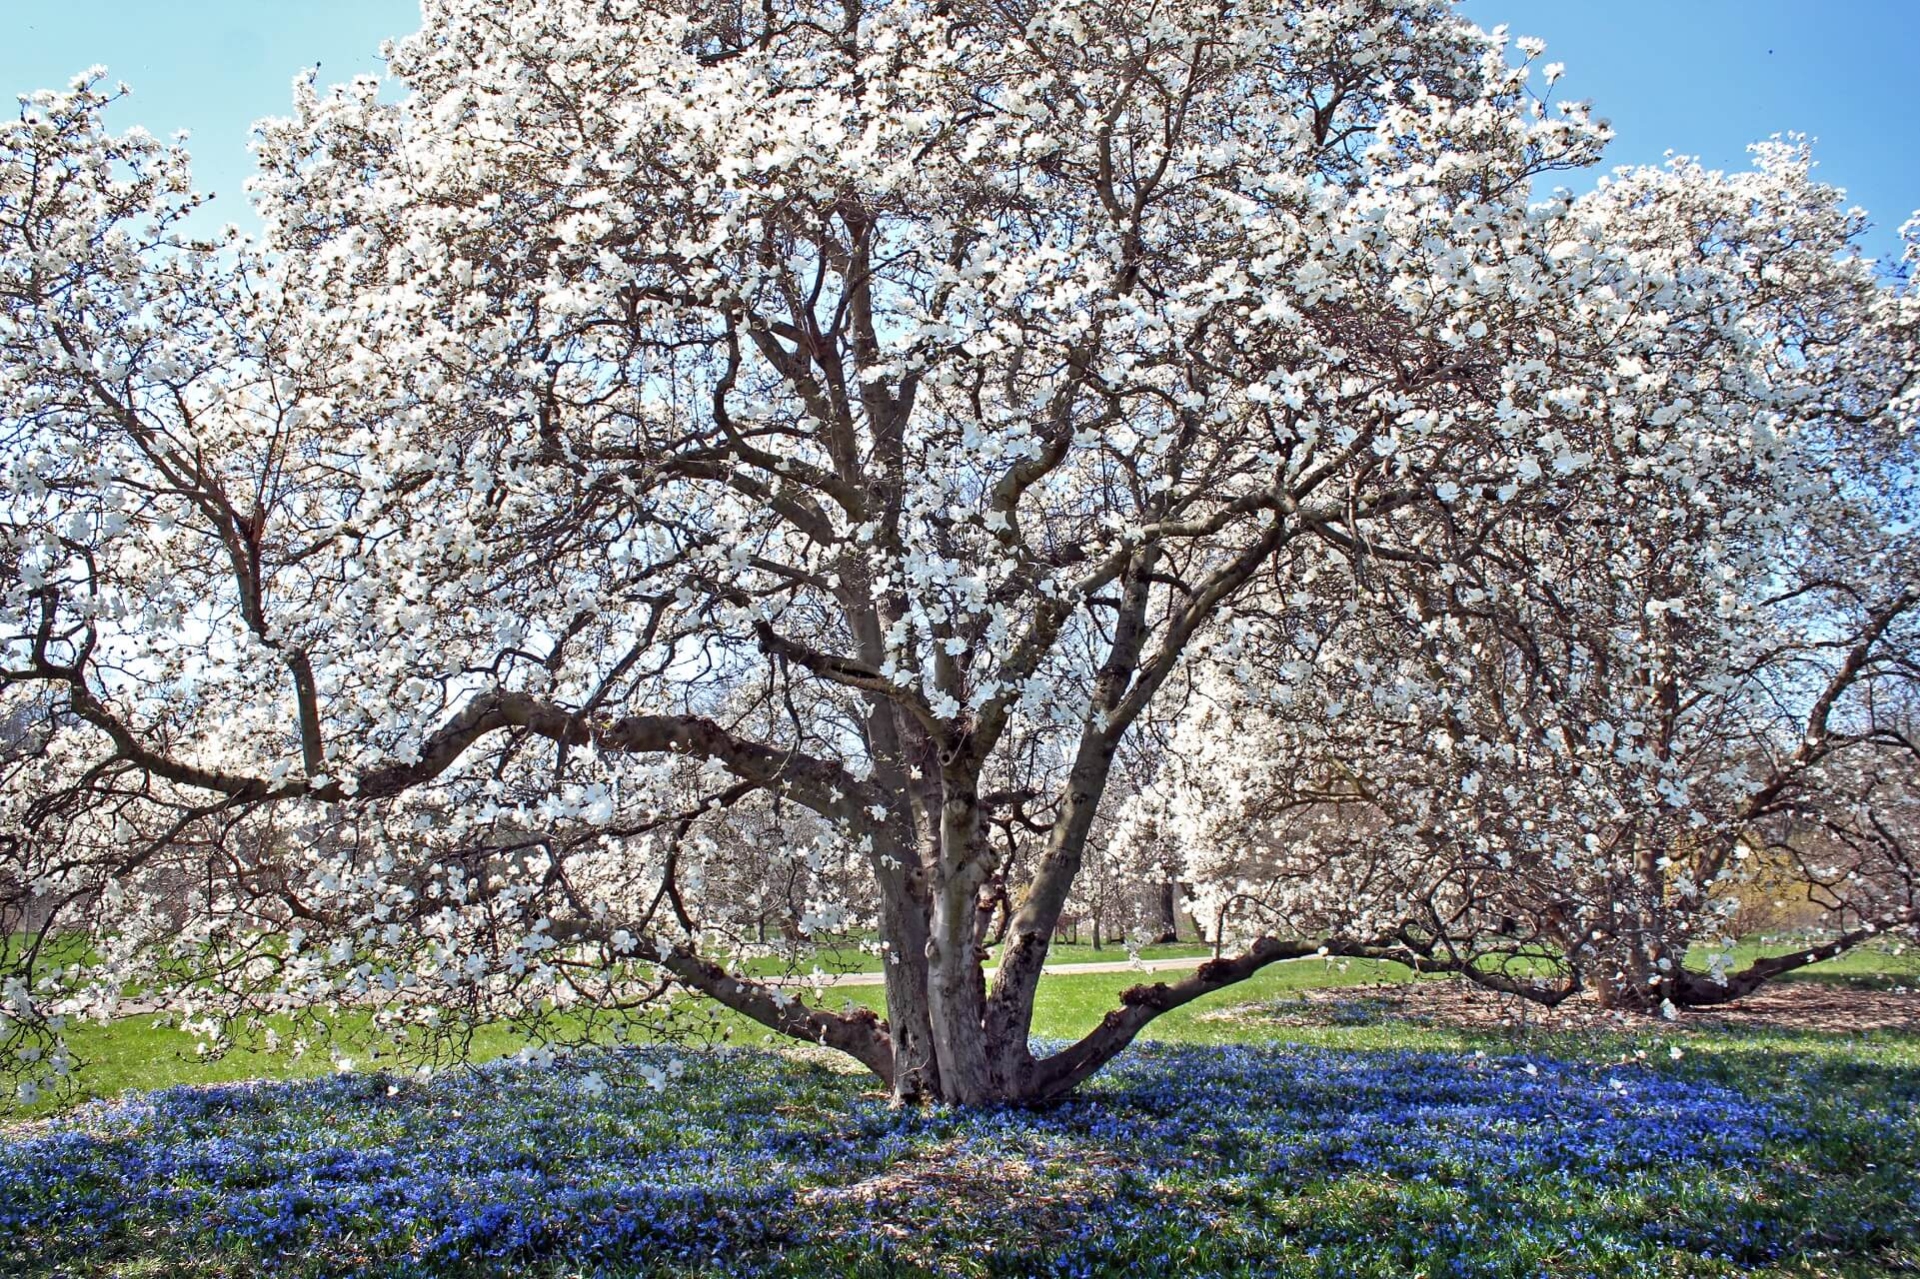 Photograph of a flowering magnolia tree with blue squill flowers below